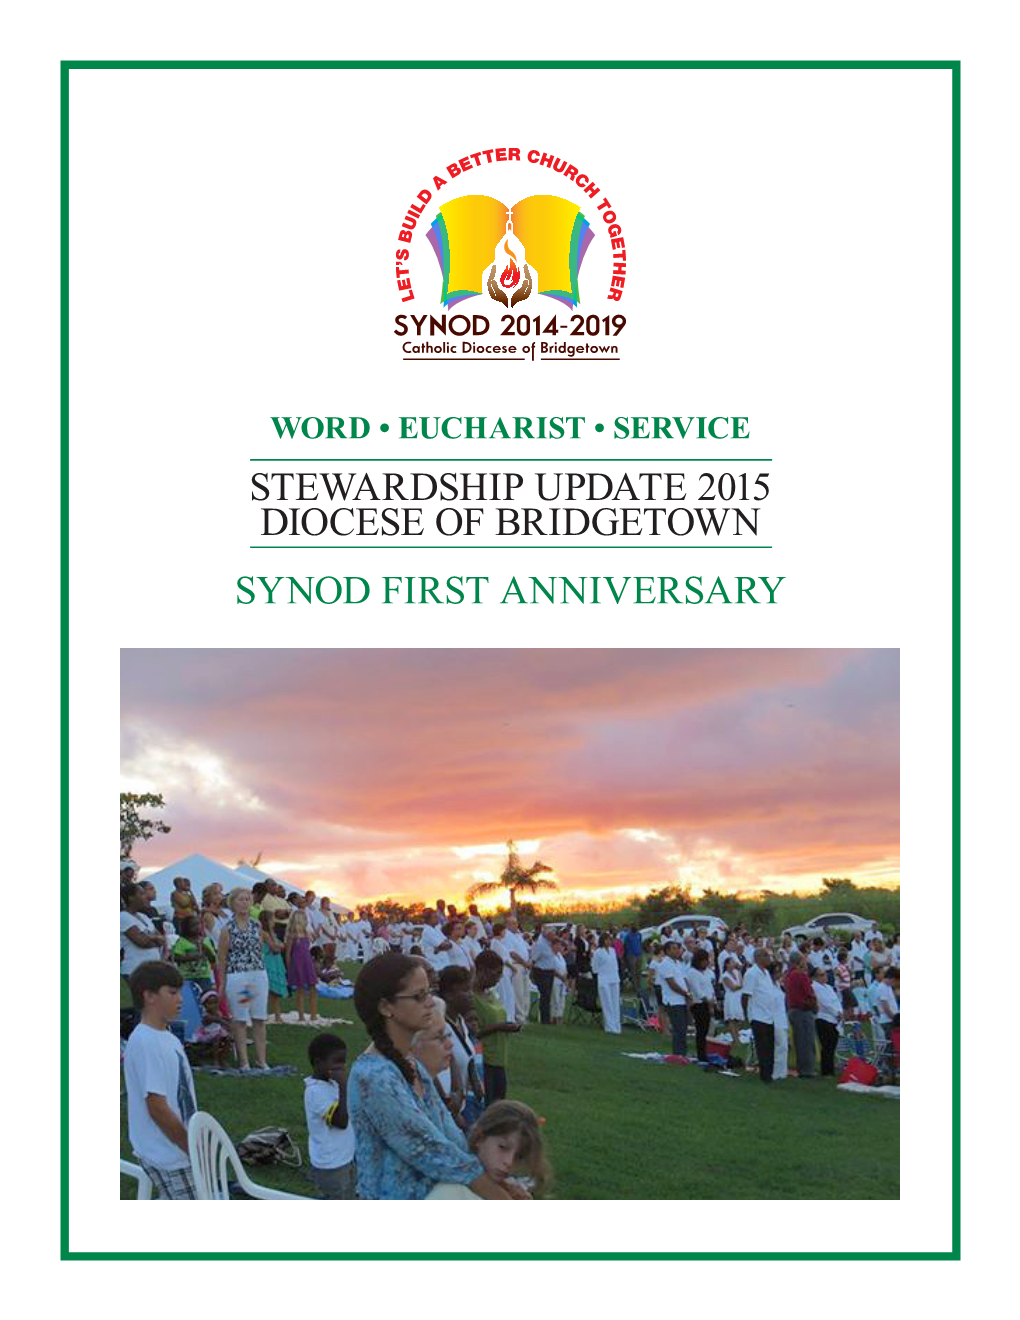 Stewardship Update 2015 Diocese of Bridgetown Synod First Anniversary Progress Reports